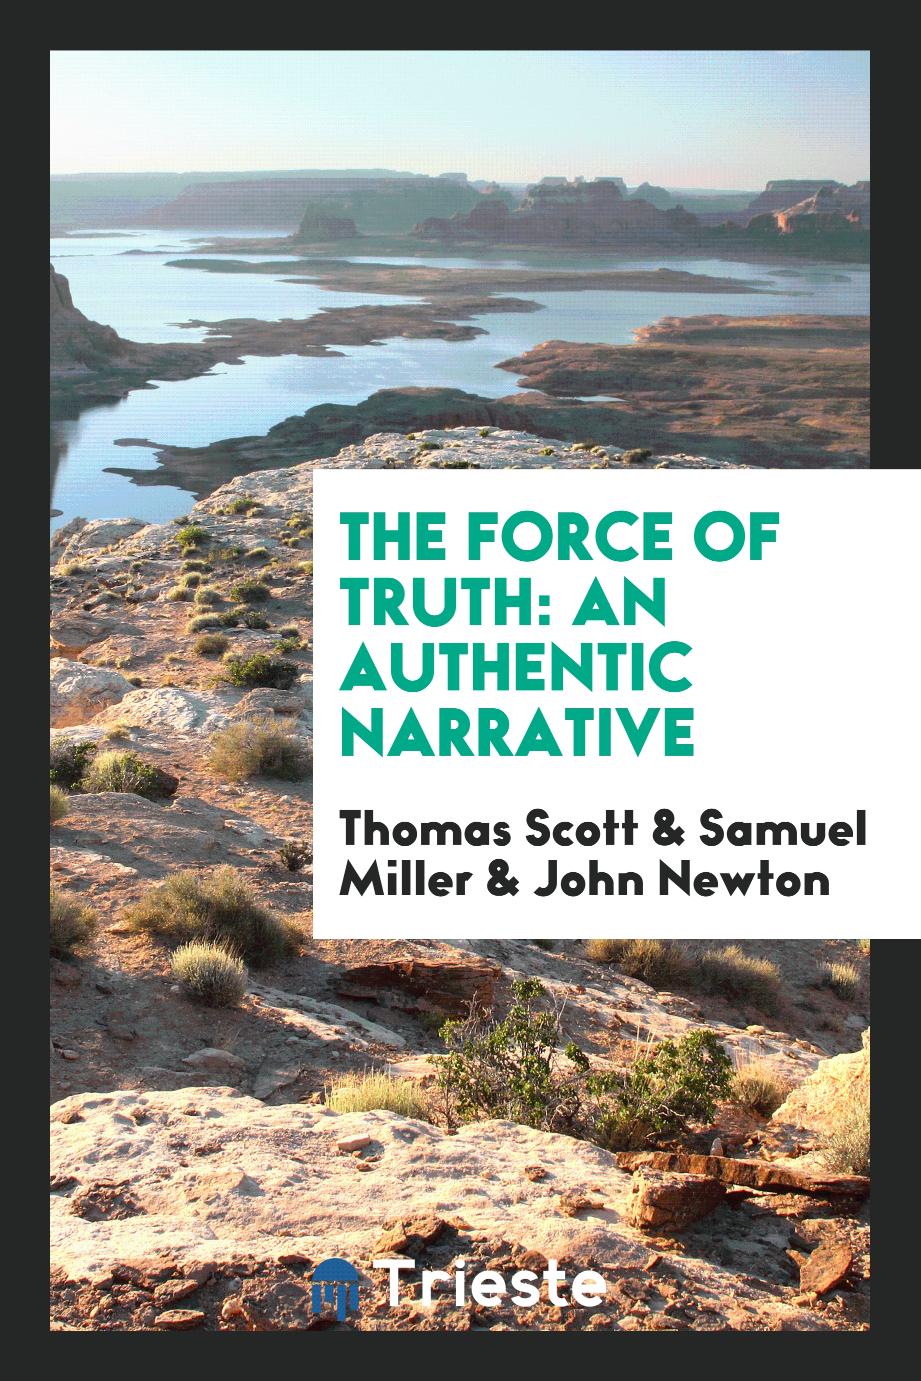 The force of truth: an authentic narrative